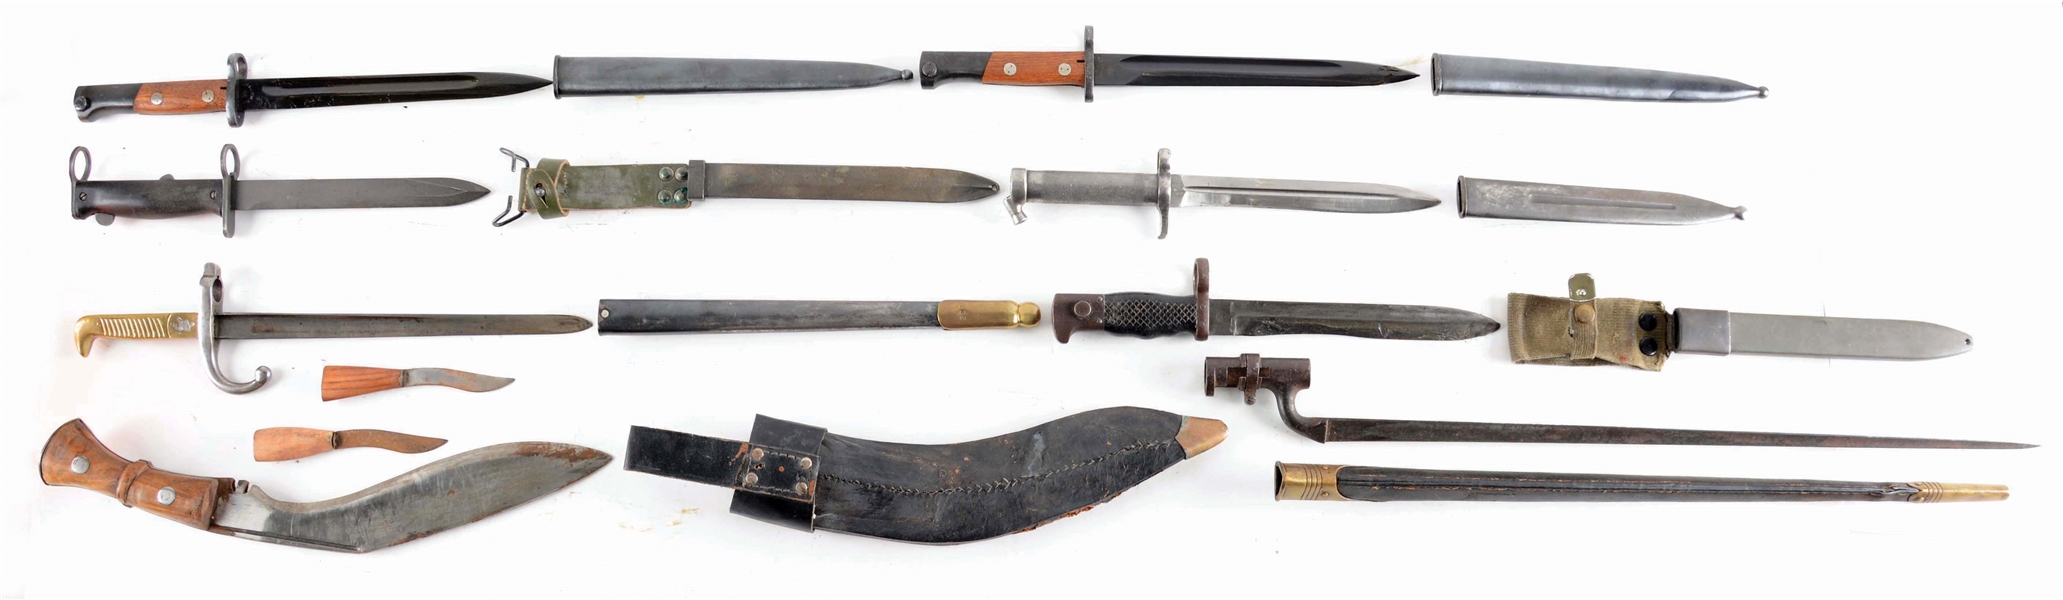 LOT OF 8: EIGHT EDGED WEAPONS FROM VARIOUS COUNTRIES.